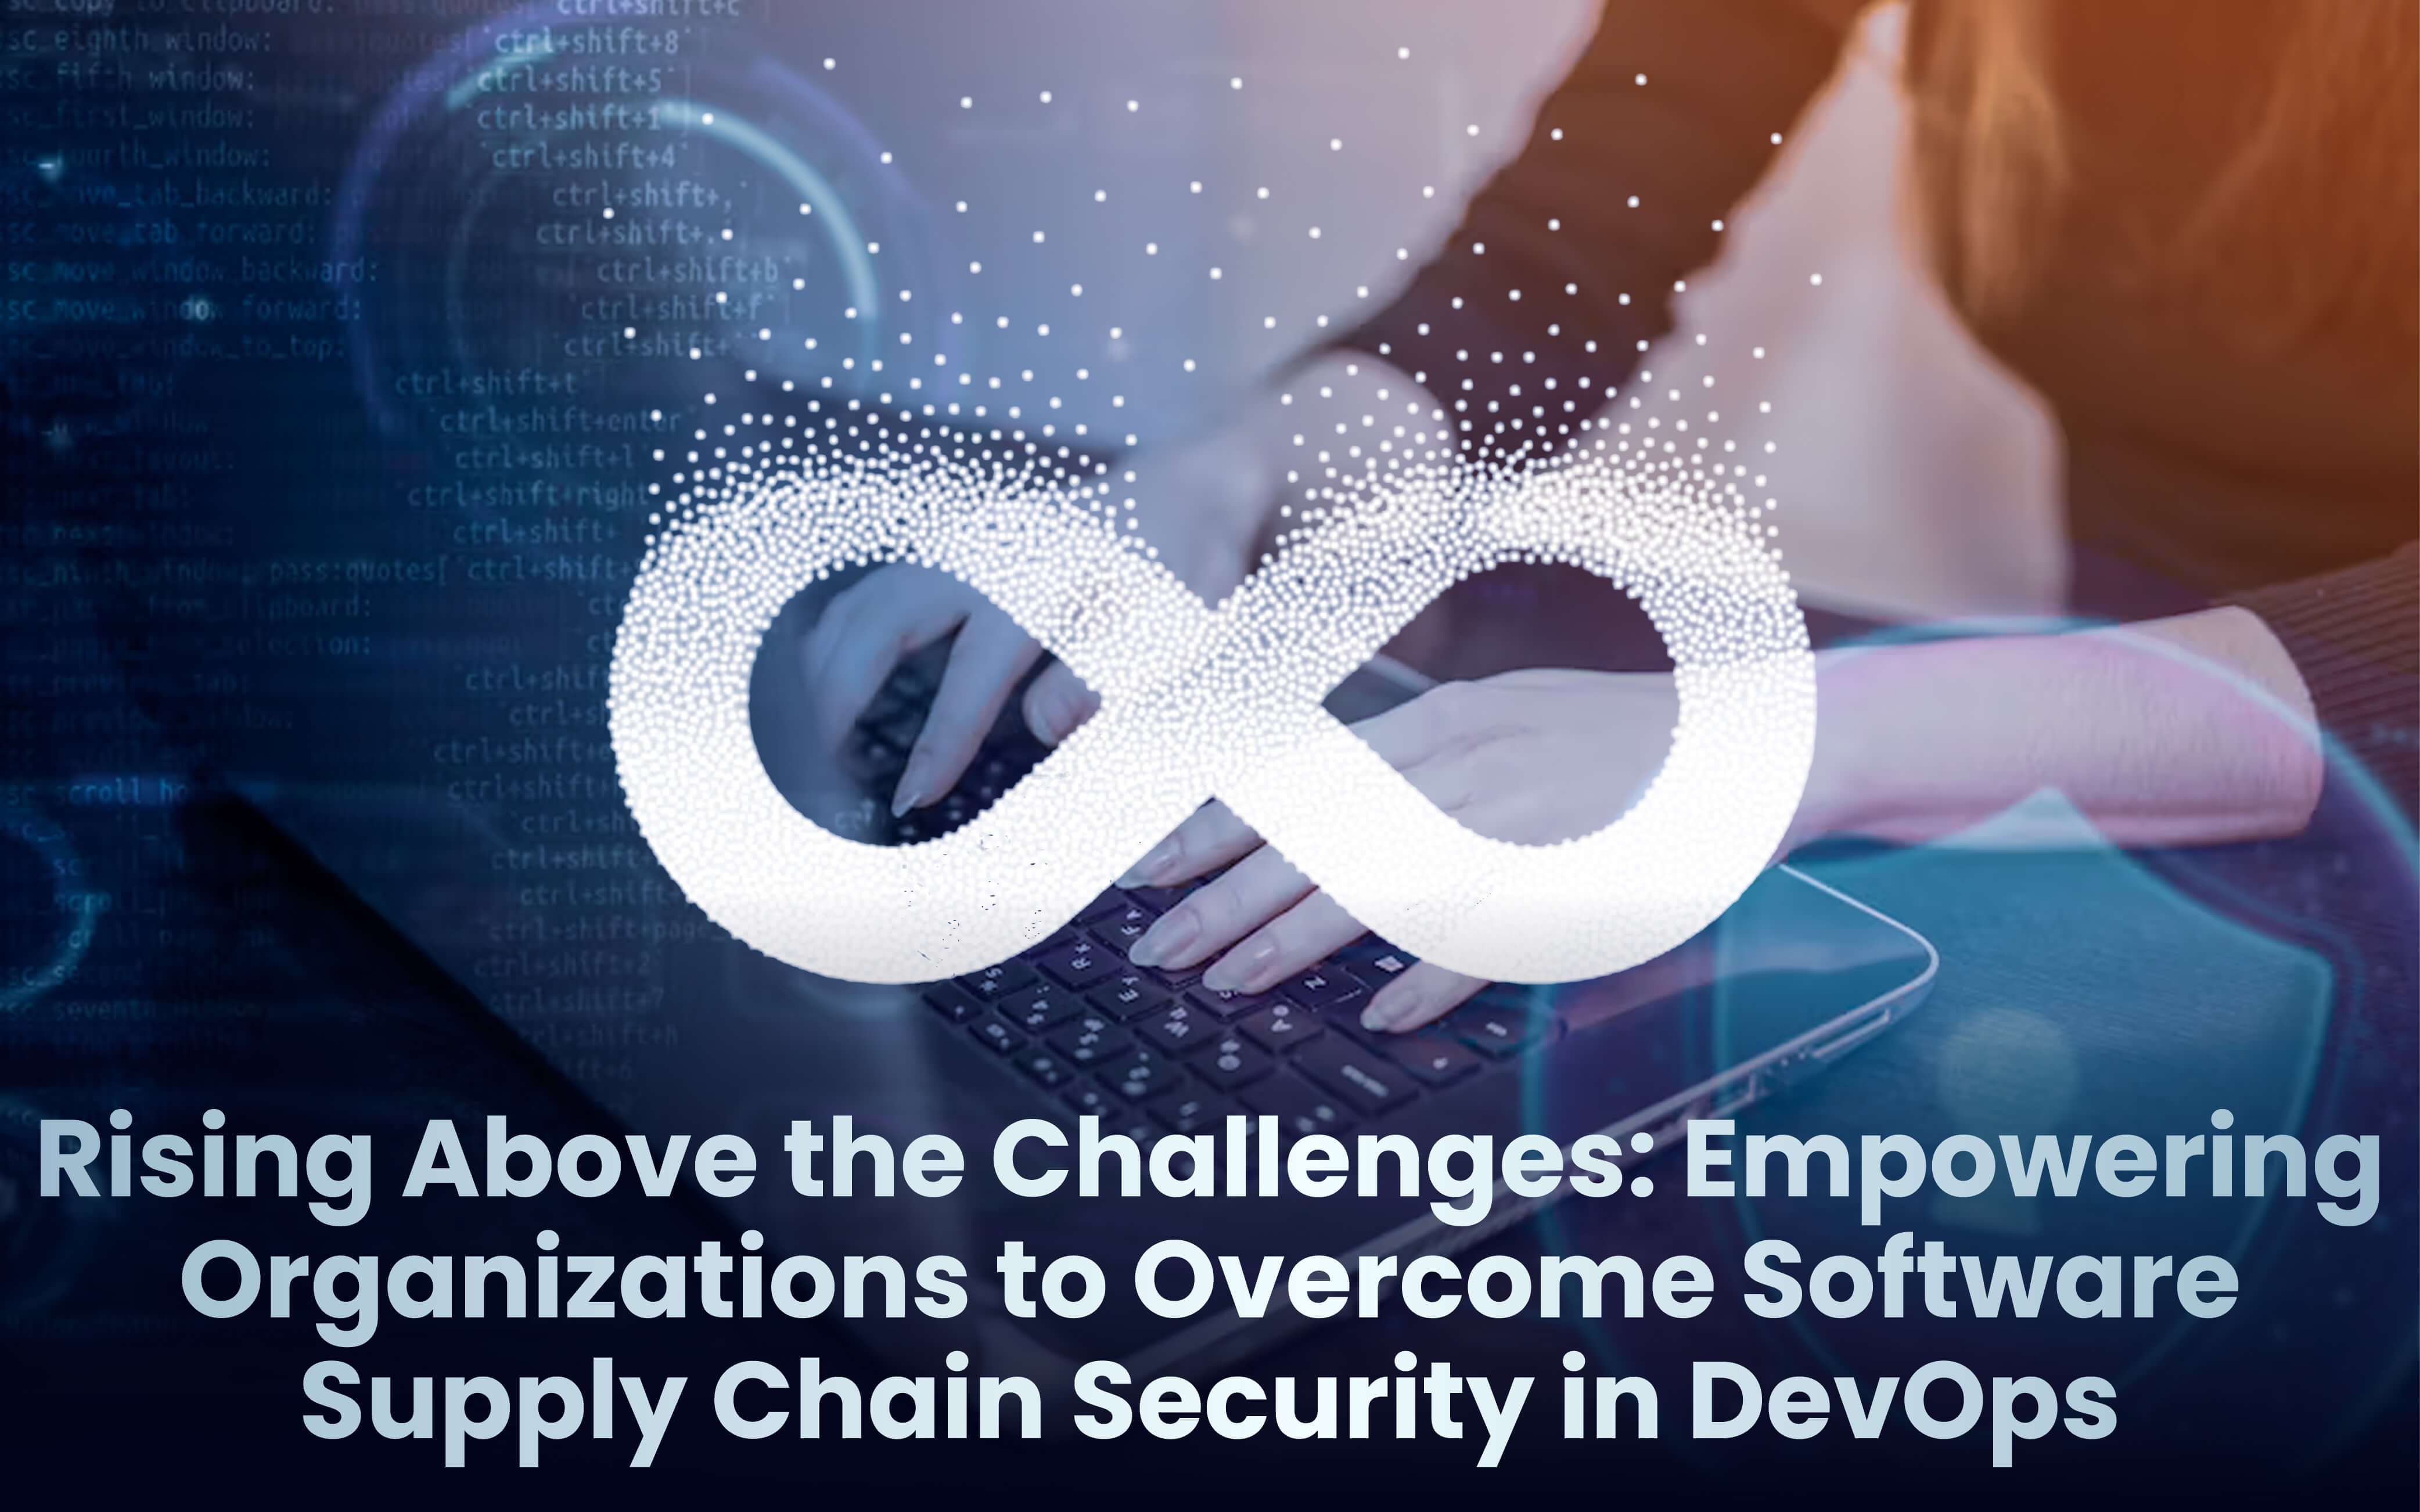 Rising Above the Challenges: Empowering Organizations to Overcome Software Supply Chain Security in DevOps